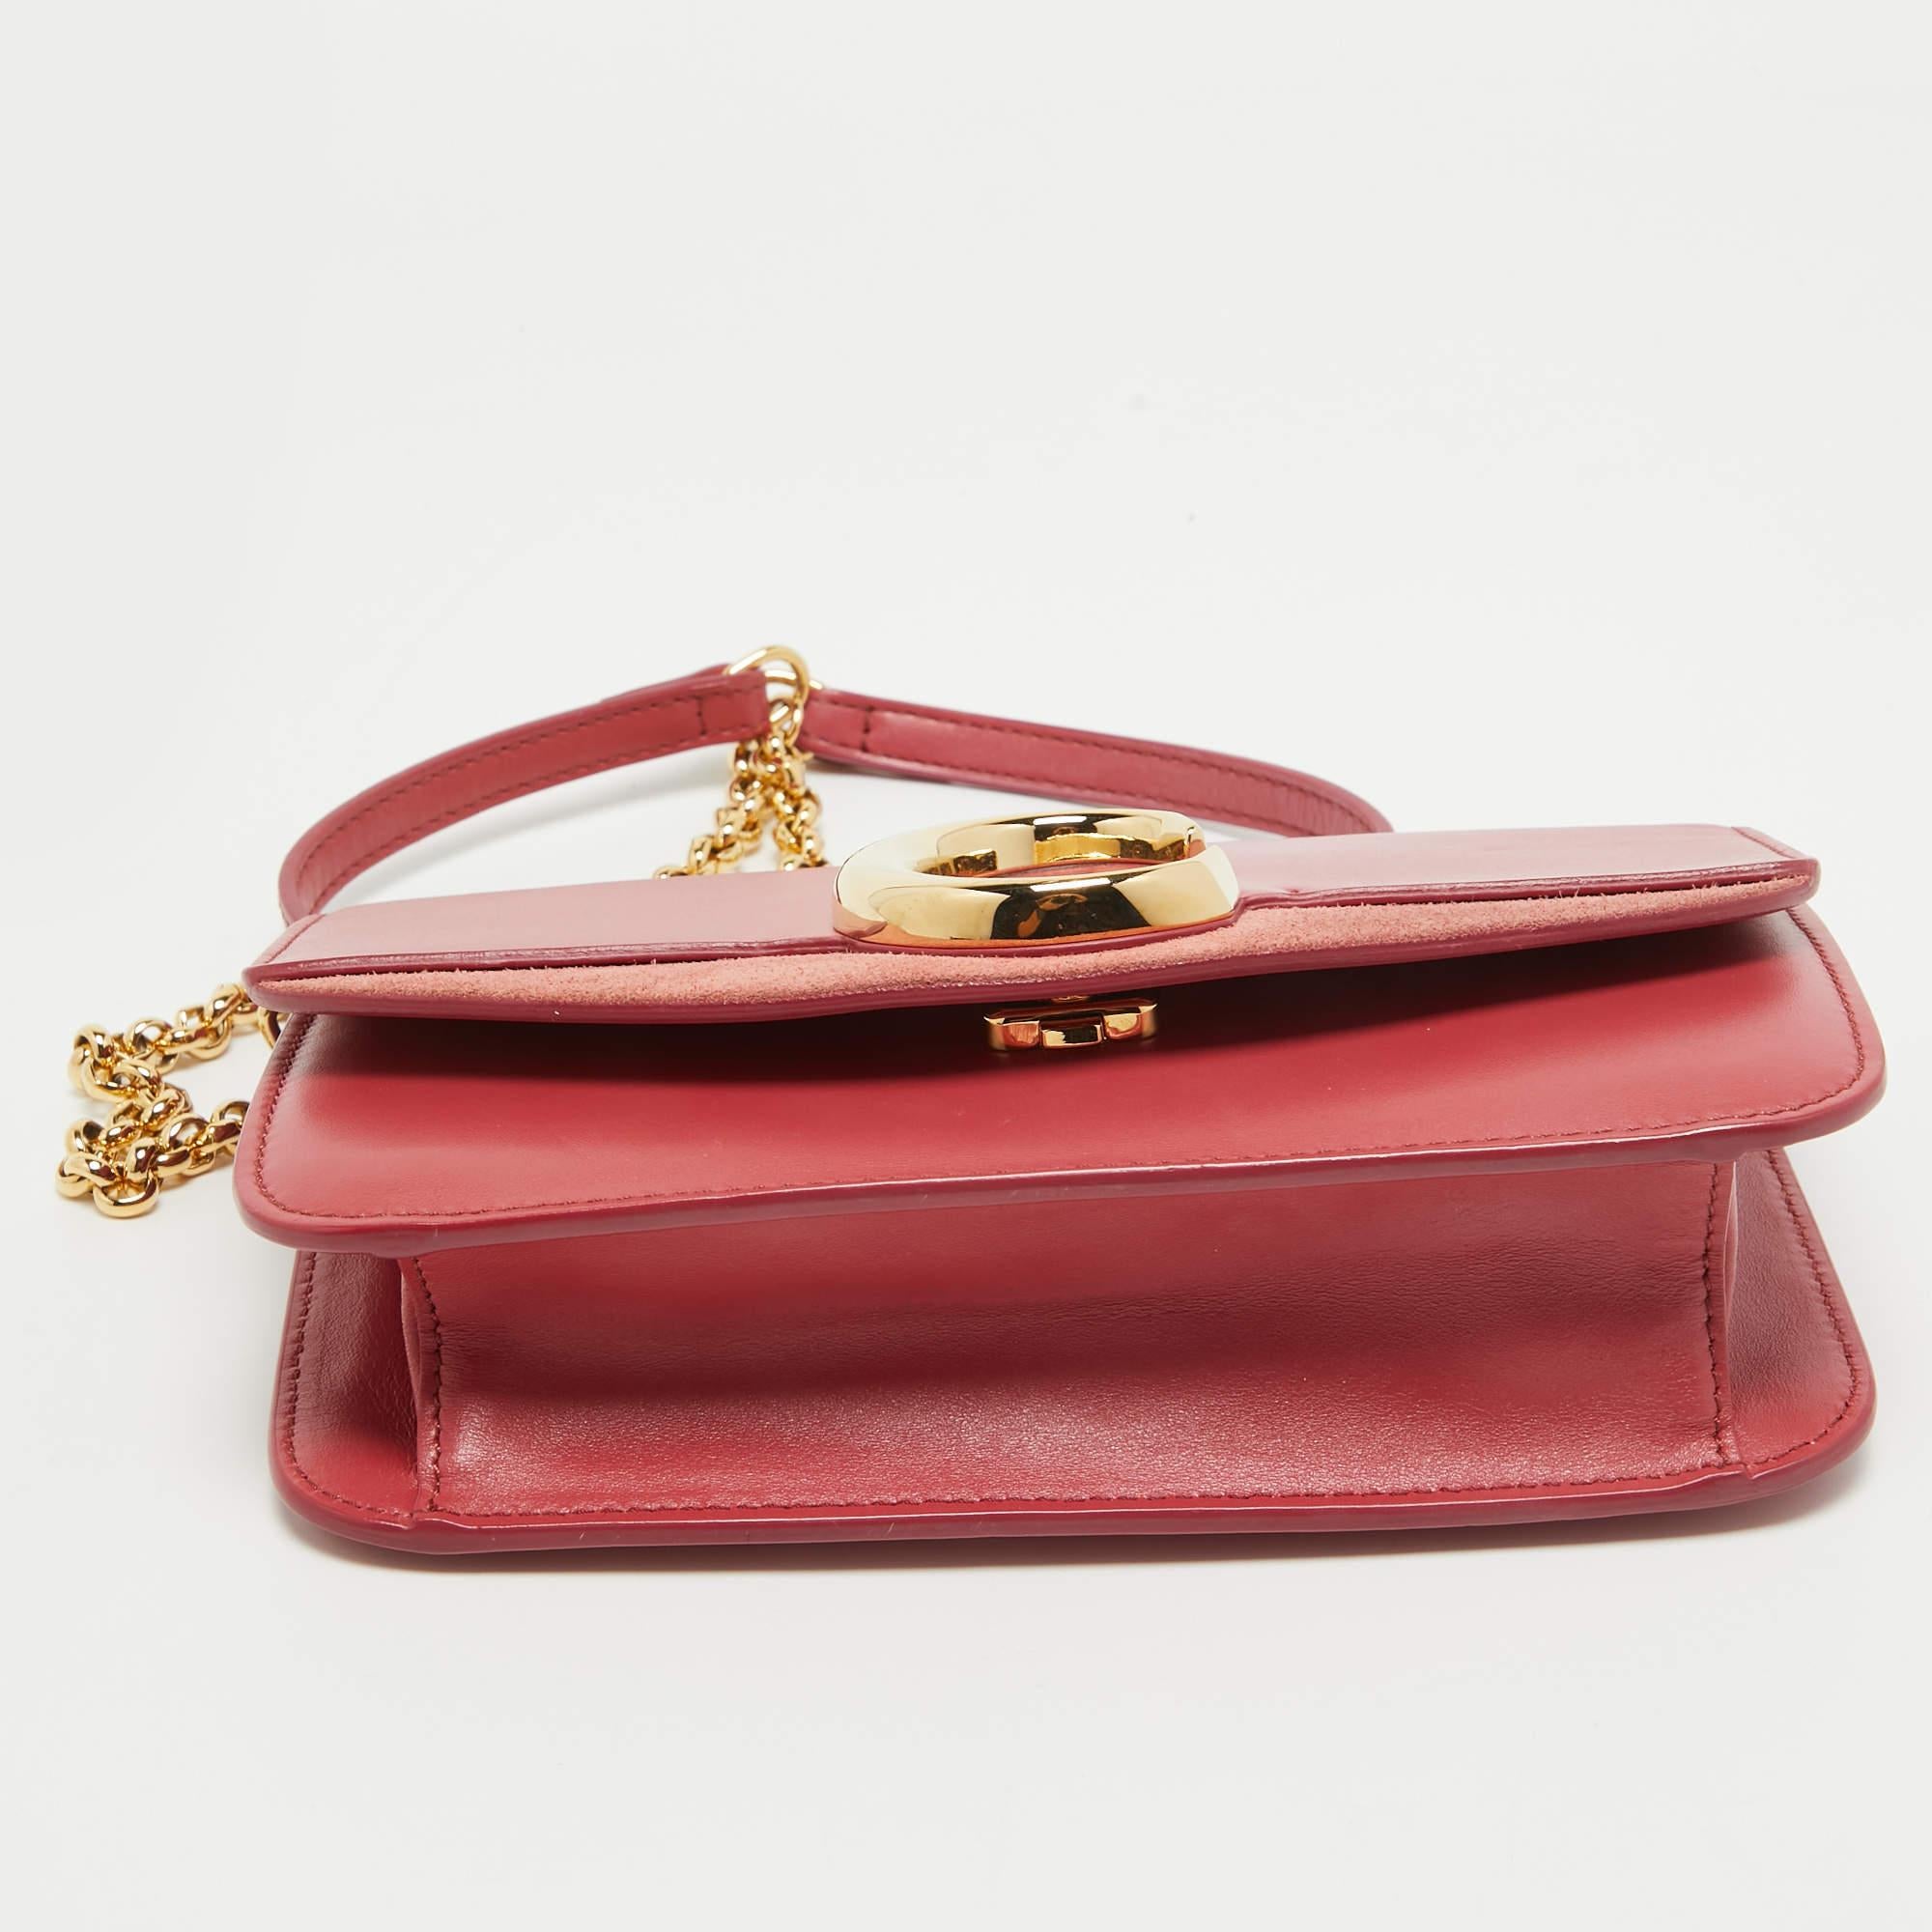 Chloe Pink Leather and Suede C Chain Clutch For Sale 1